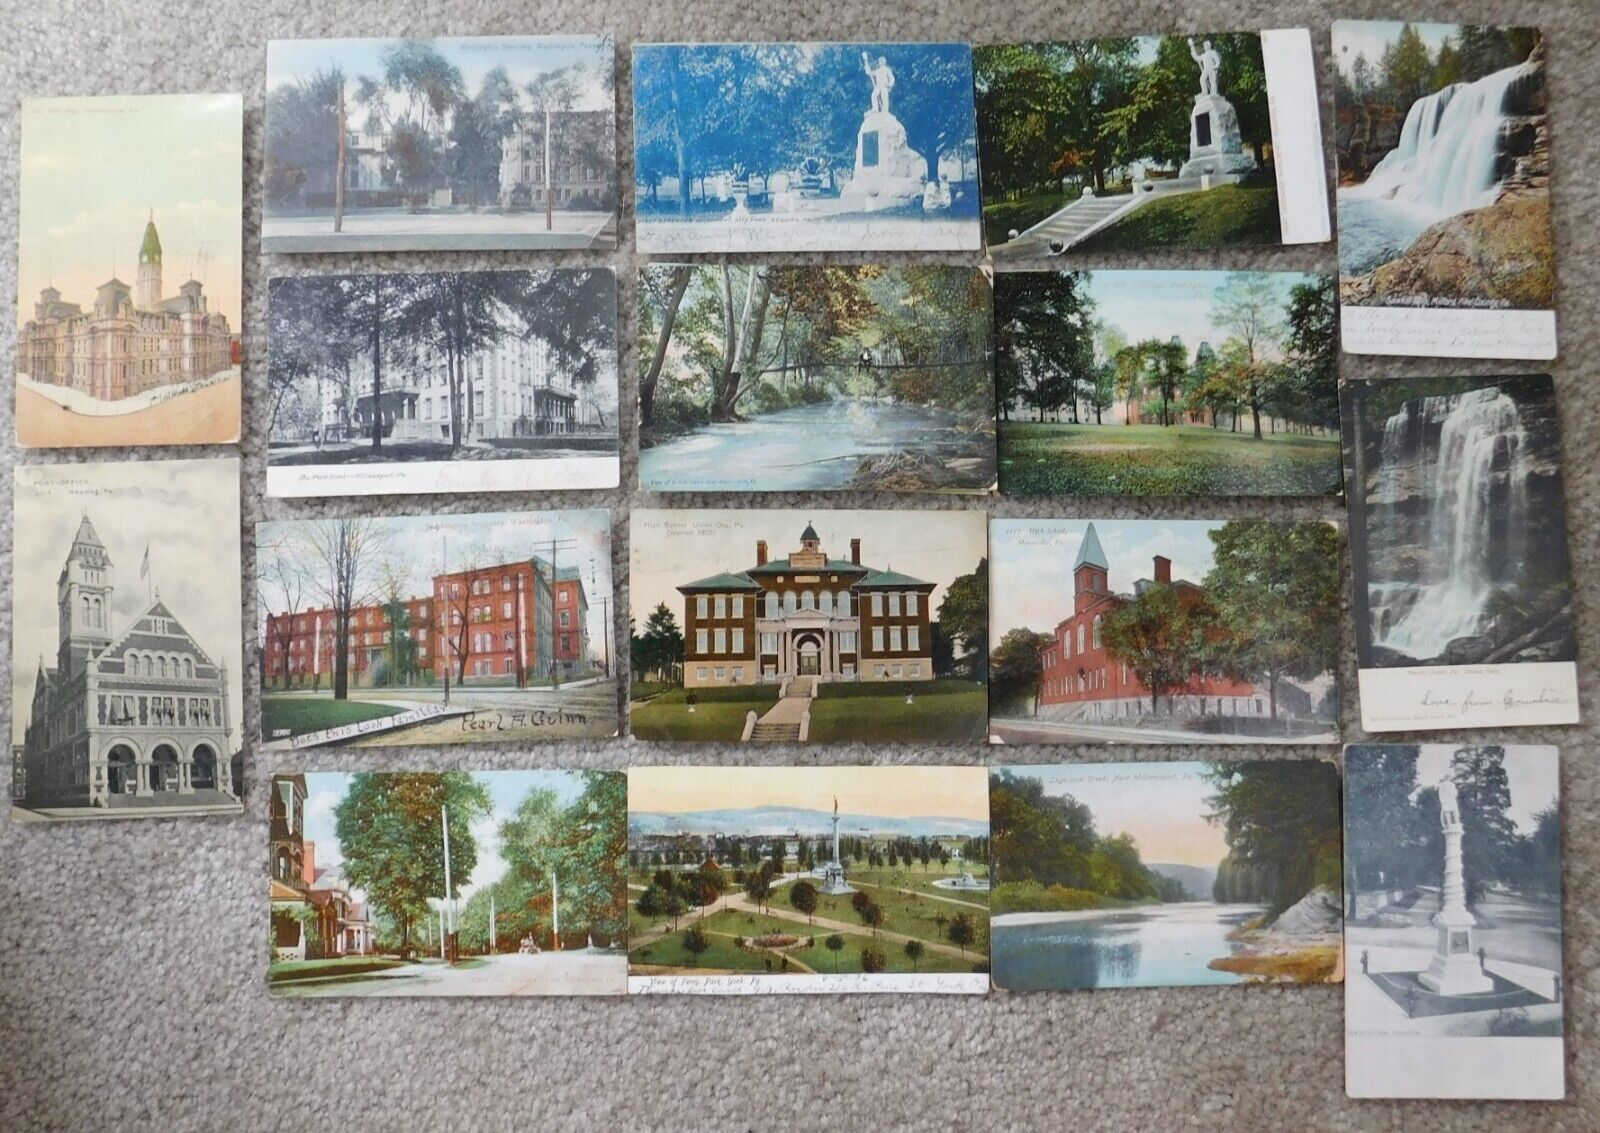 Pennsylvania PA Mixed Lot of 17 Antique Postcards 1900-1920 Early 20th Century